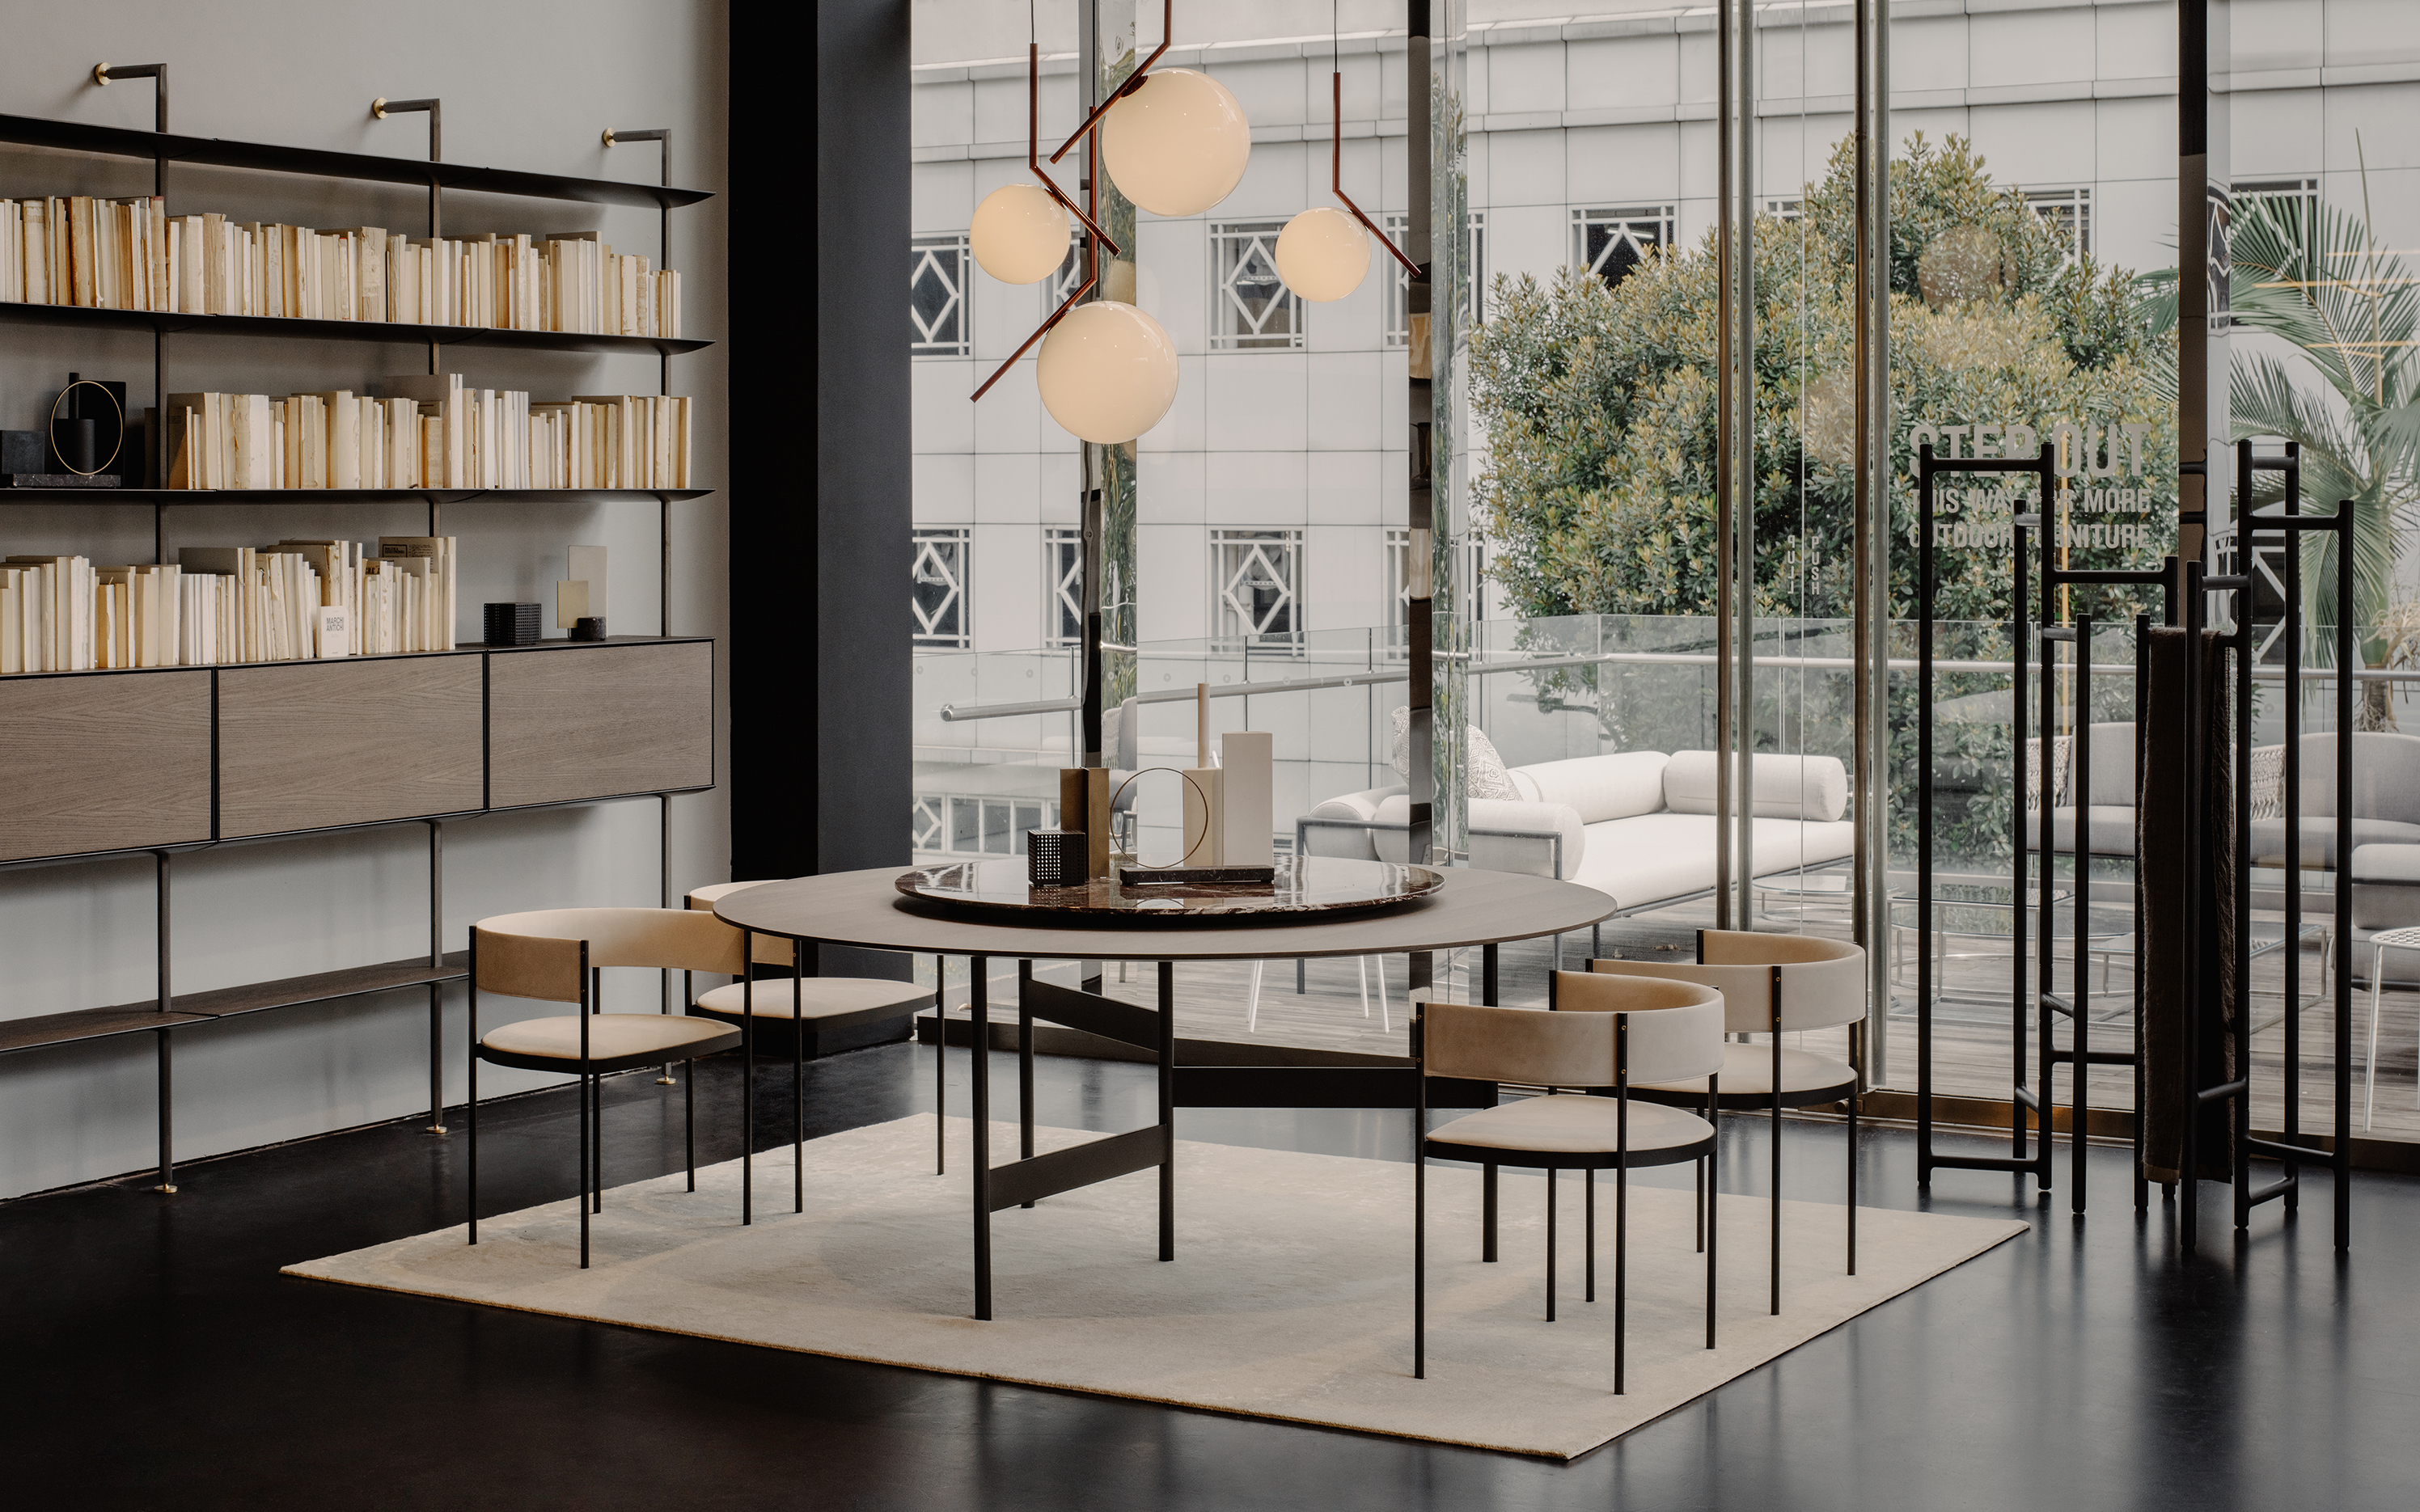 The Notes table designed by Massimo Mariani, and the Era chair and Sailor shelving system designed by David Lopez Quincoces for Living Divani, with the IC suspension 1 light by Michael Anastassiades for Flos. Image © Khoo Guo Jie, Khoogj.